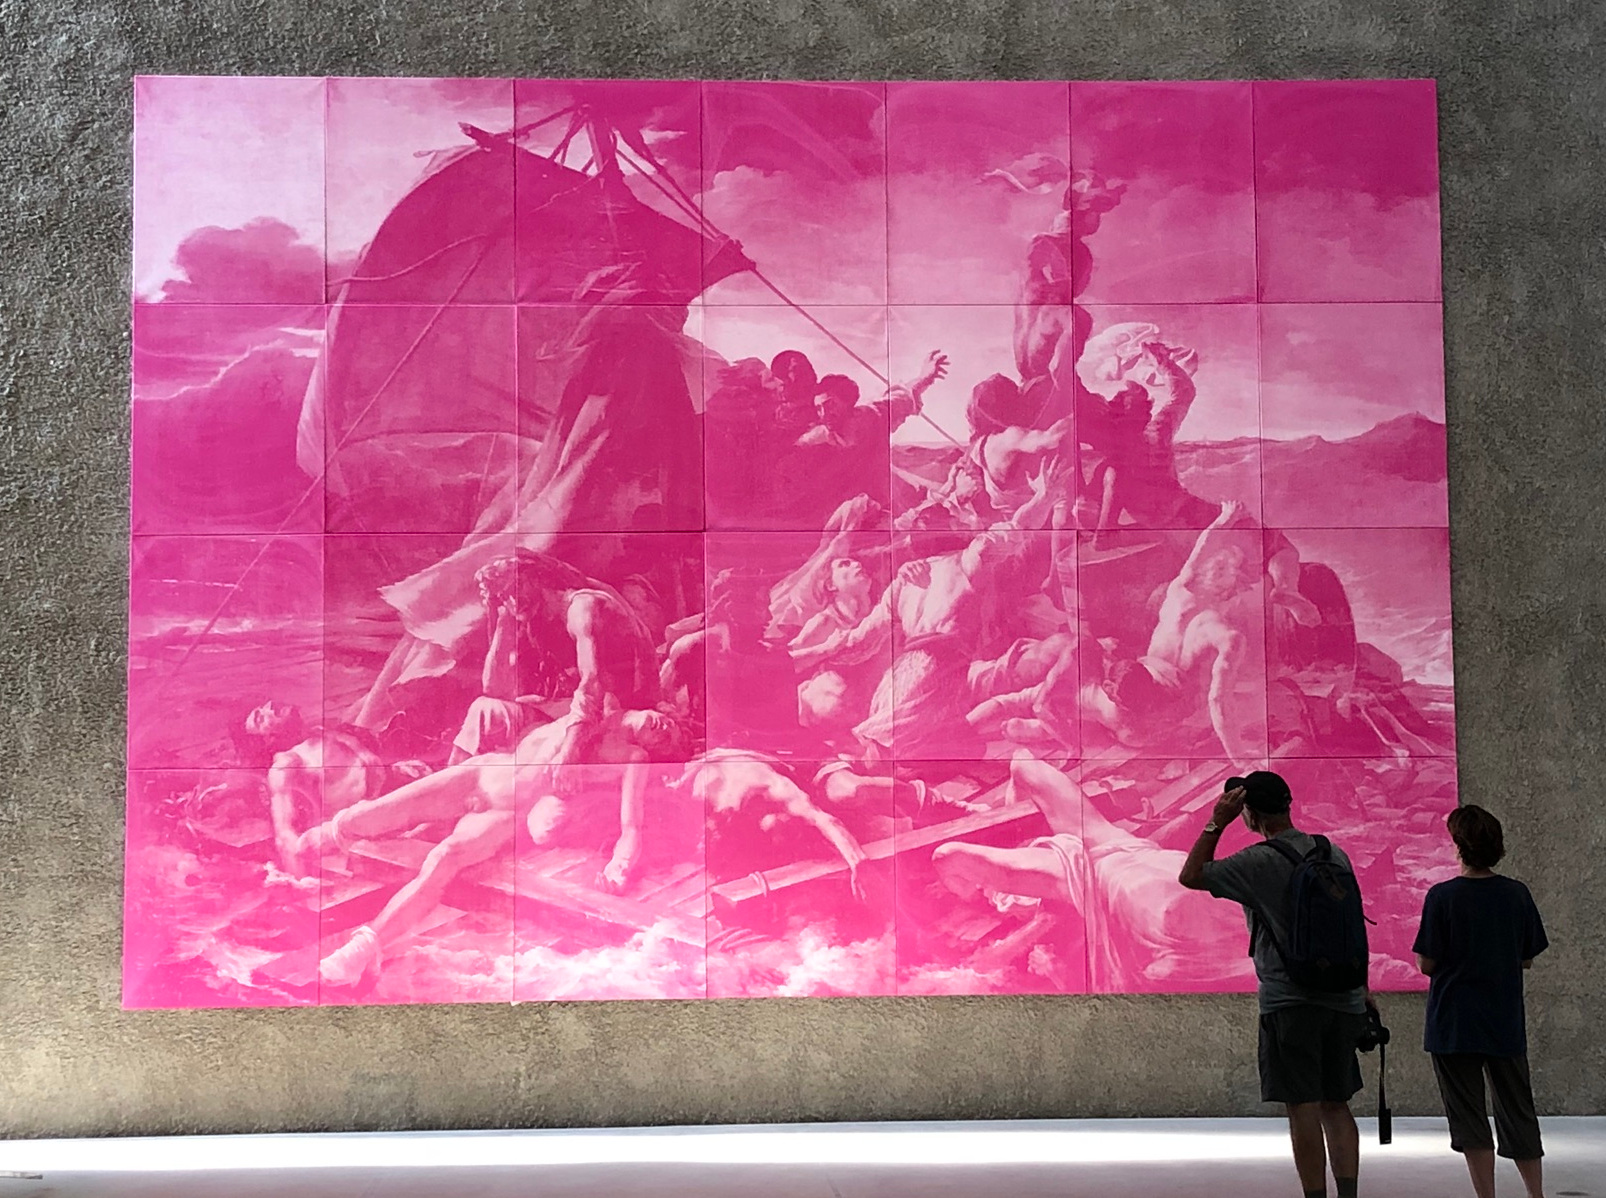 Large collection of canvases stiched together to form a pink version of a classic painting. Two people stand in front of it, admiring it.